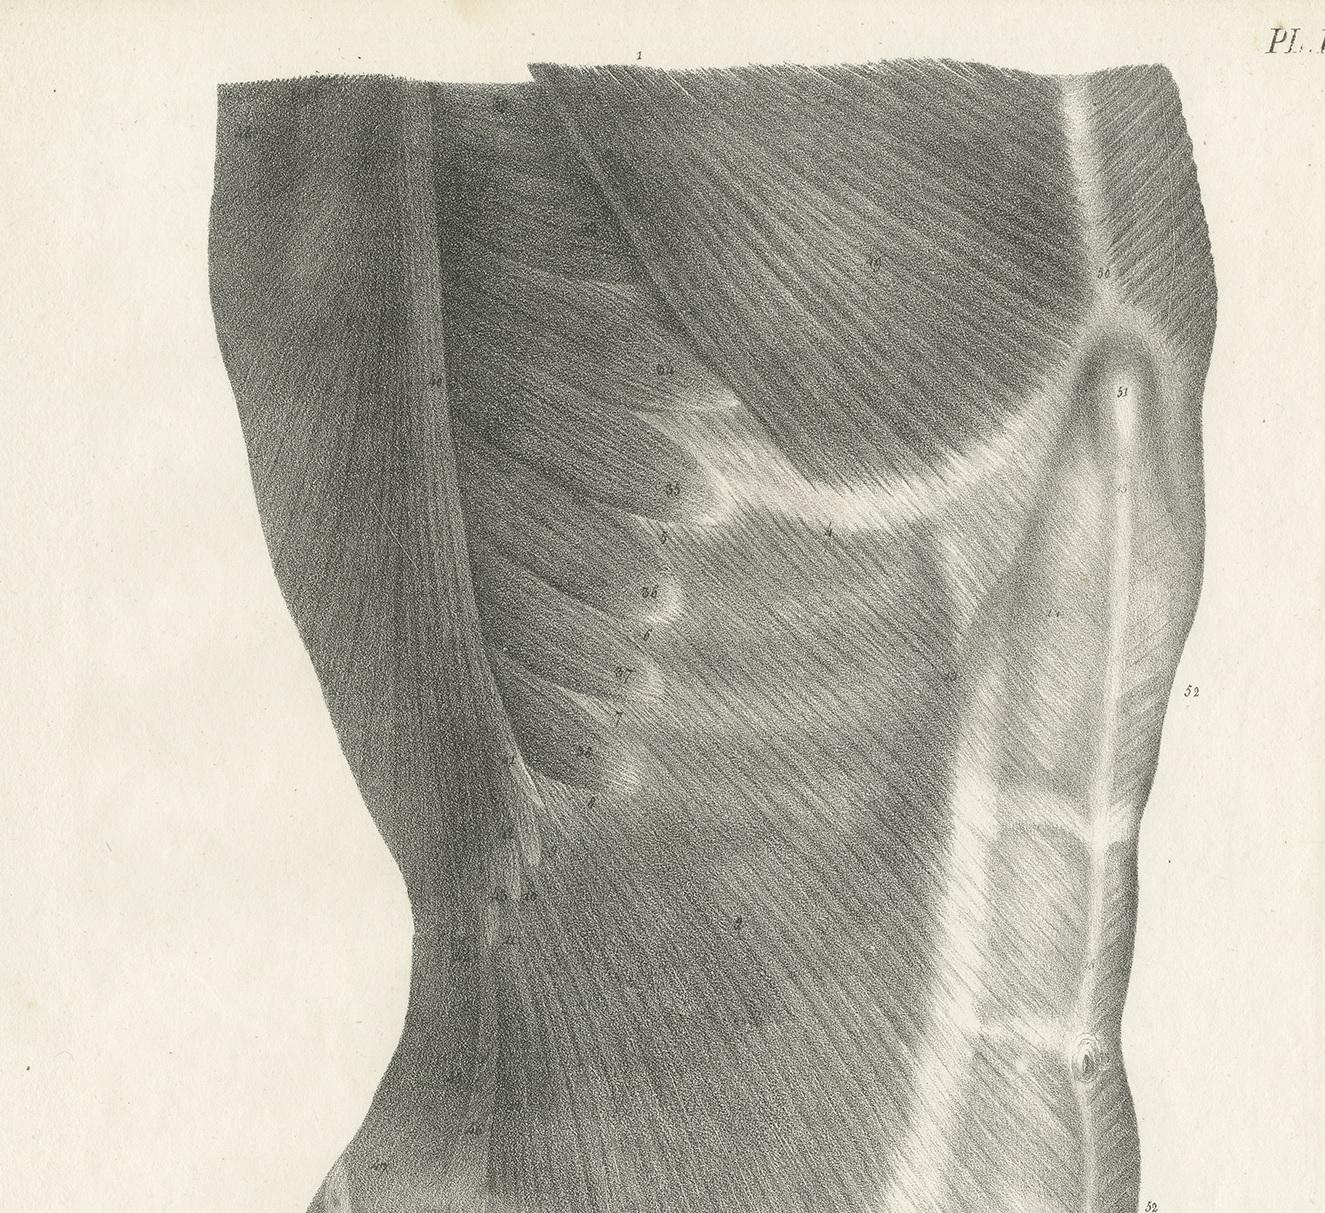 Engraved Pl. LXXII Antique Anatomy / Medical Print of the Male Torso by Cloquet '1821' For Sale